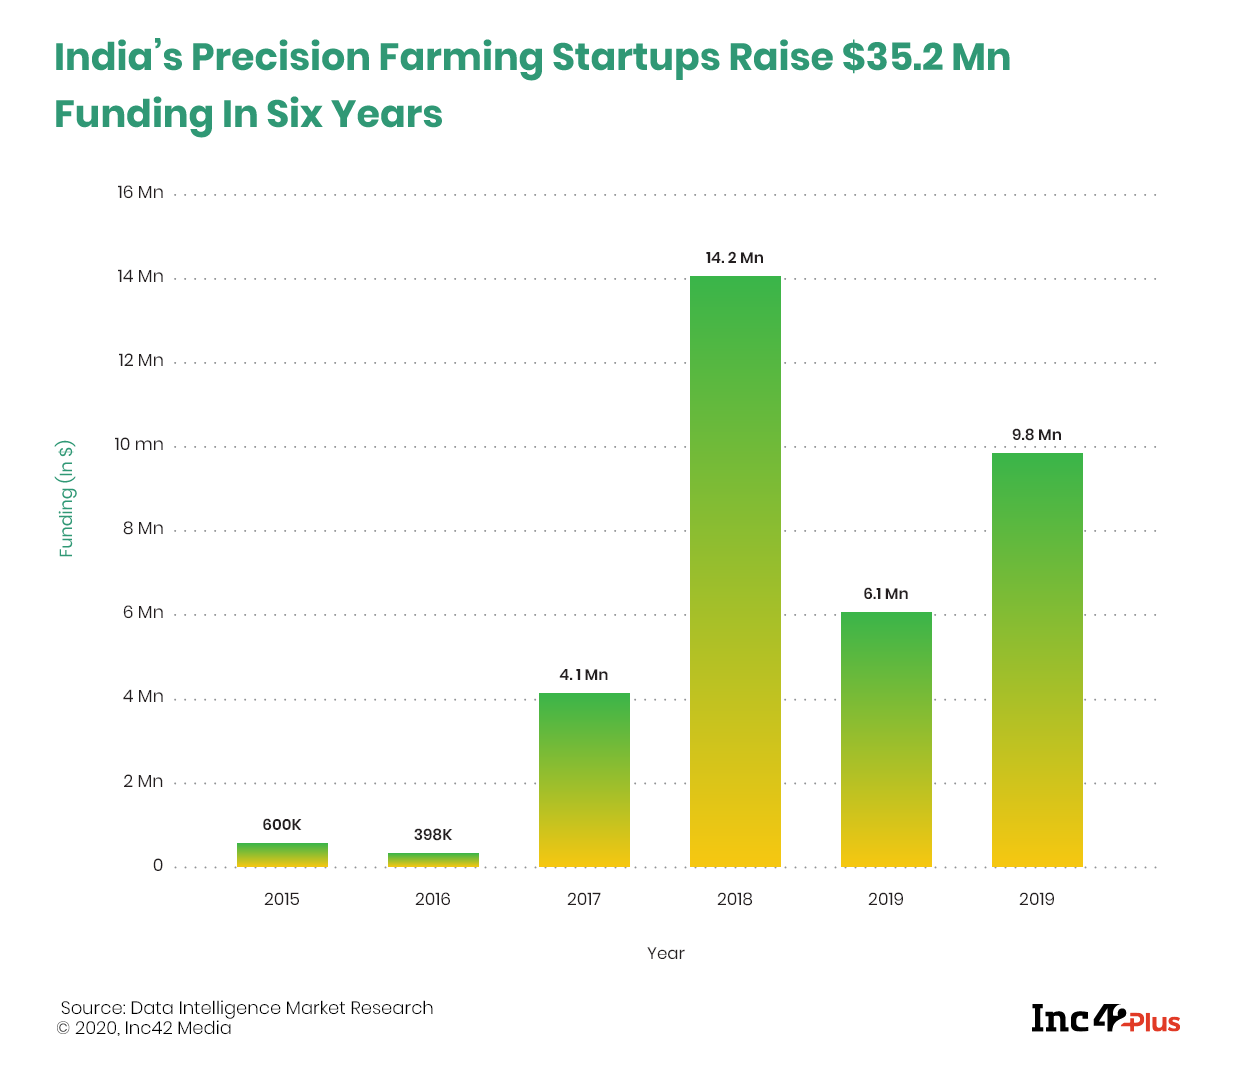 Can Indian Farmers Afford Satellite Data, IoT Devices Needed For Precision Farming?